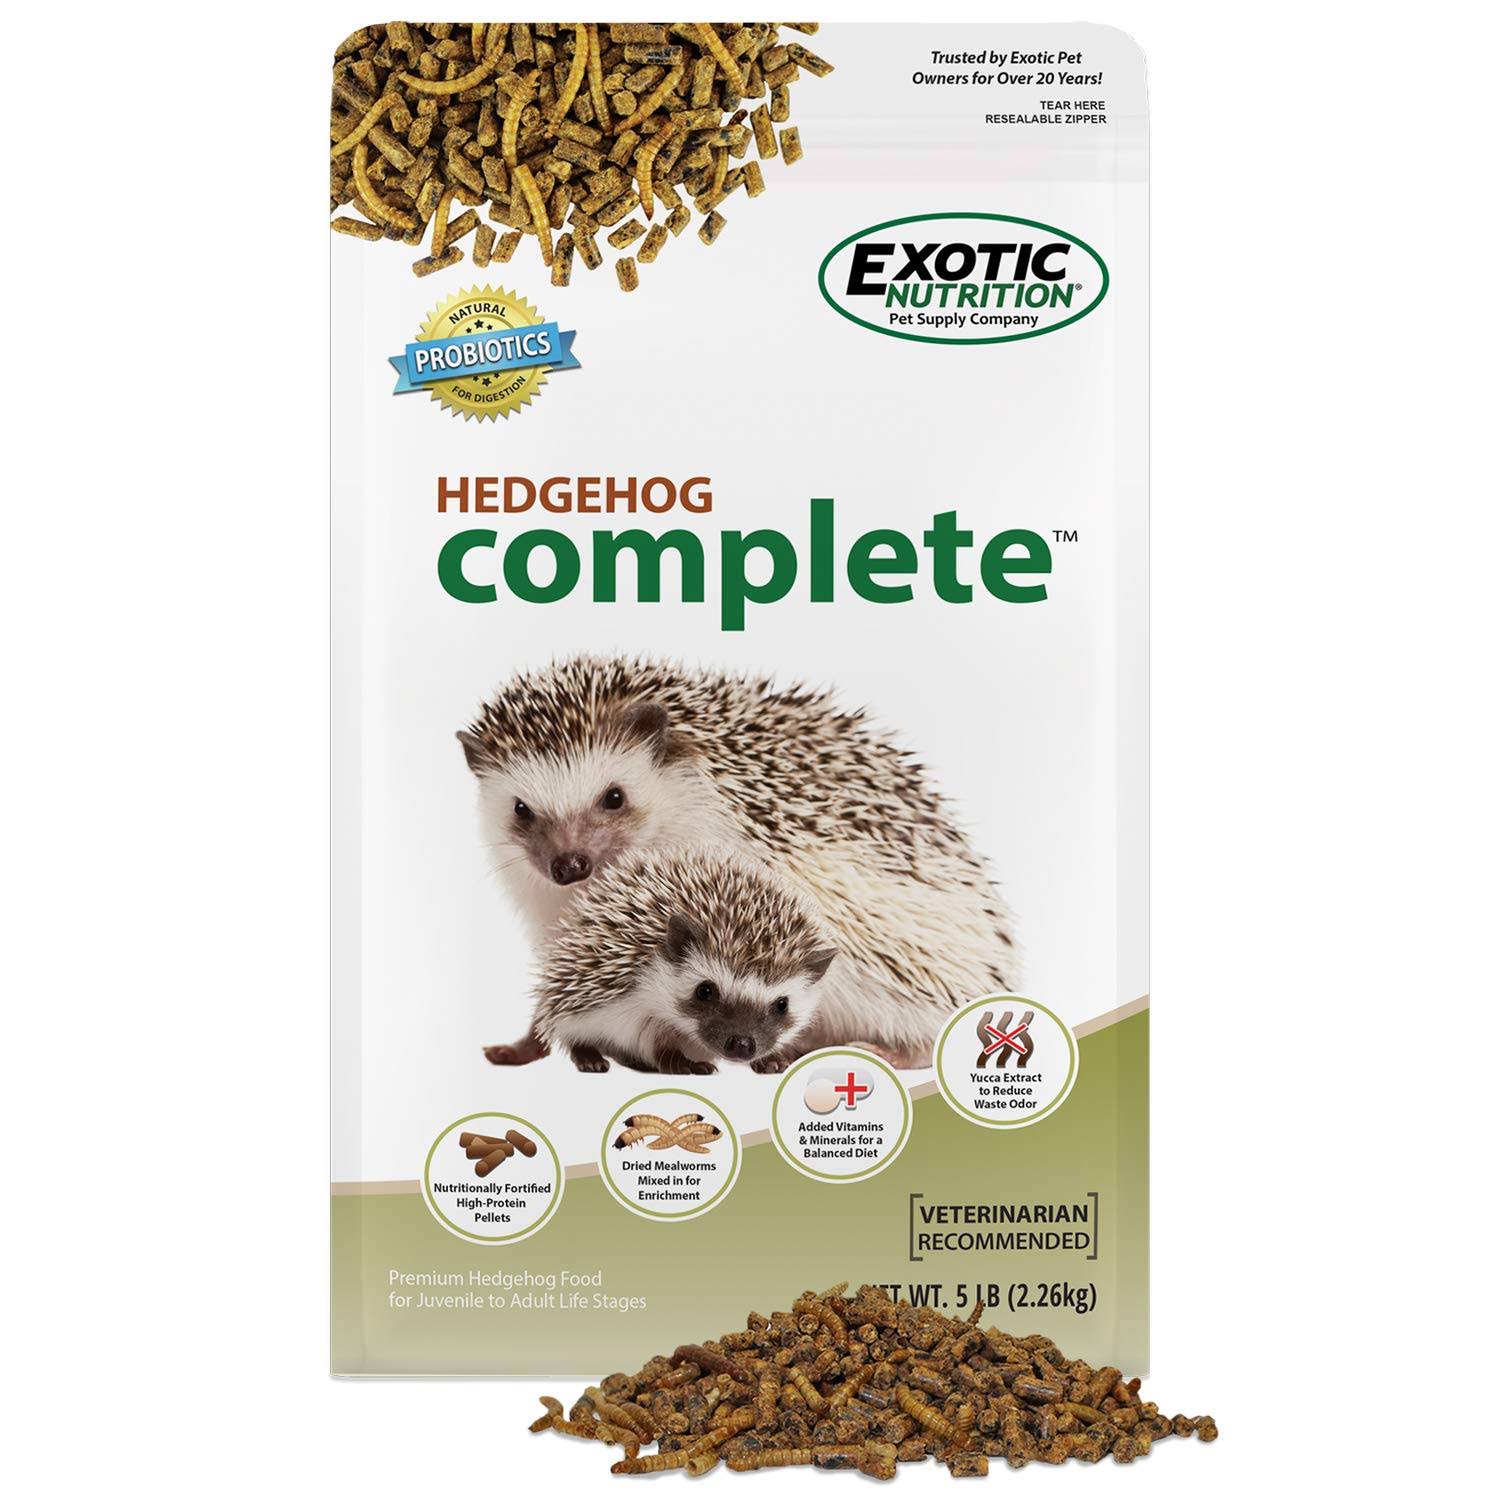 Hedgehog Complete 5 Lb - Nutritionally Complete Natural Healthy High Protein Pellets & Dried Mealworms - Food For Pet Hedgehogs